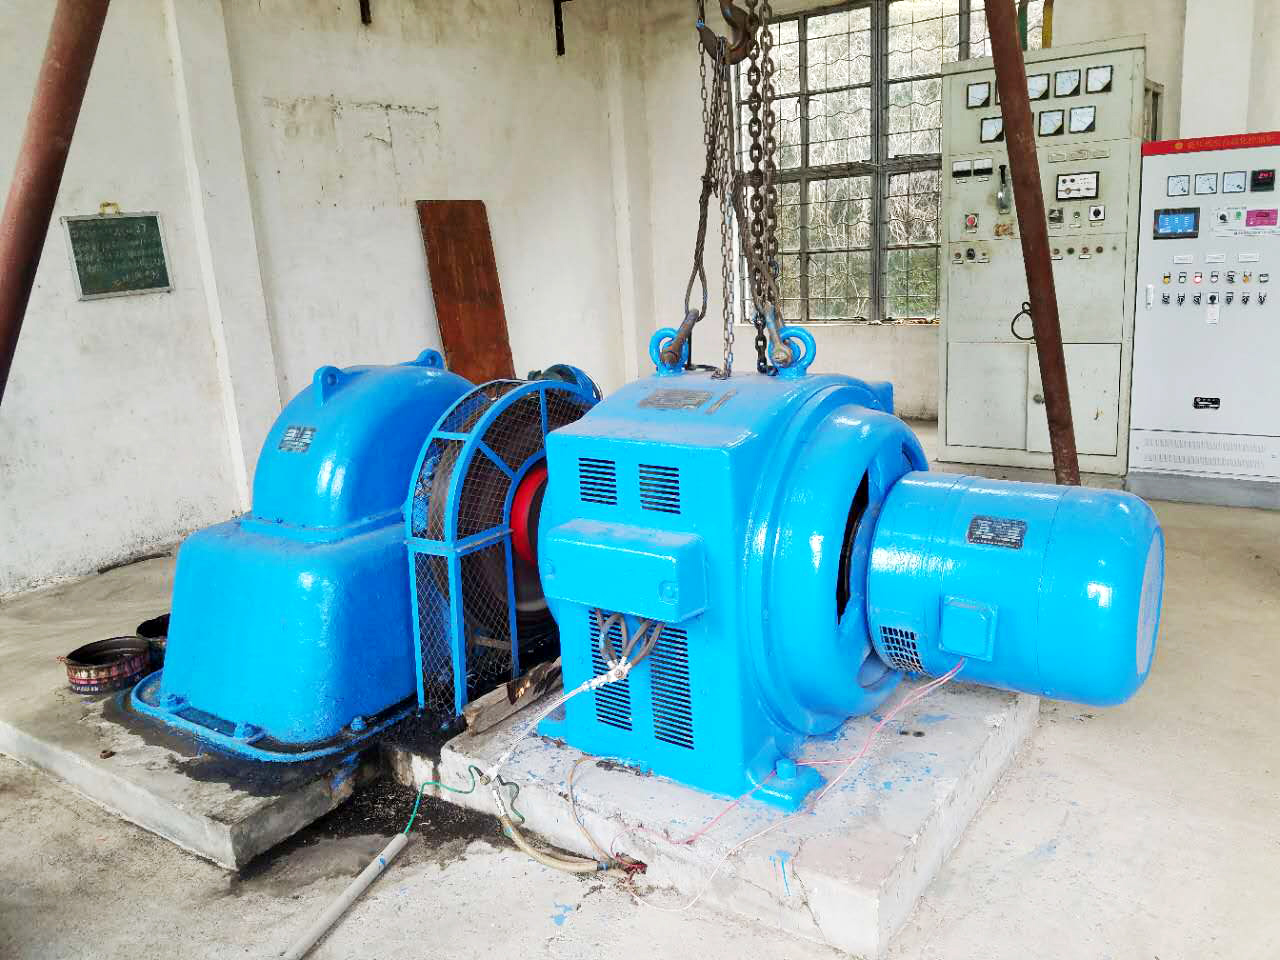 Hydropower station penstock and generator set painting project